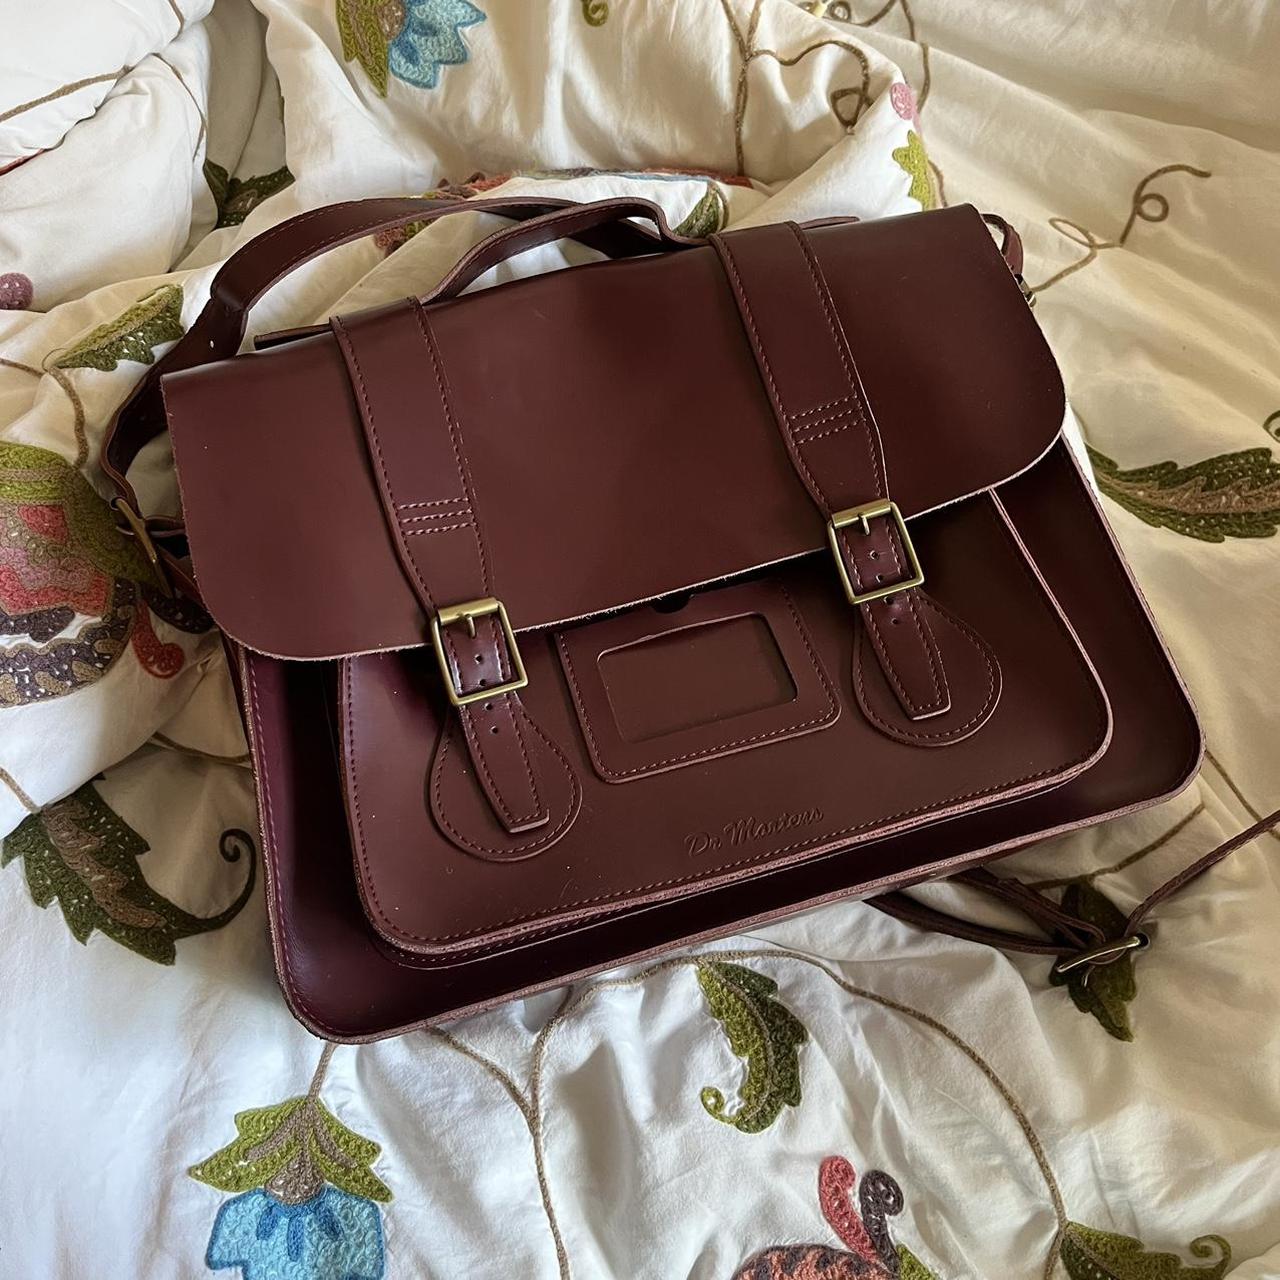 Dr. Martens Women's Burgundy and Red Bag